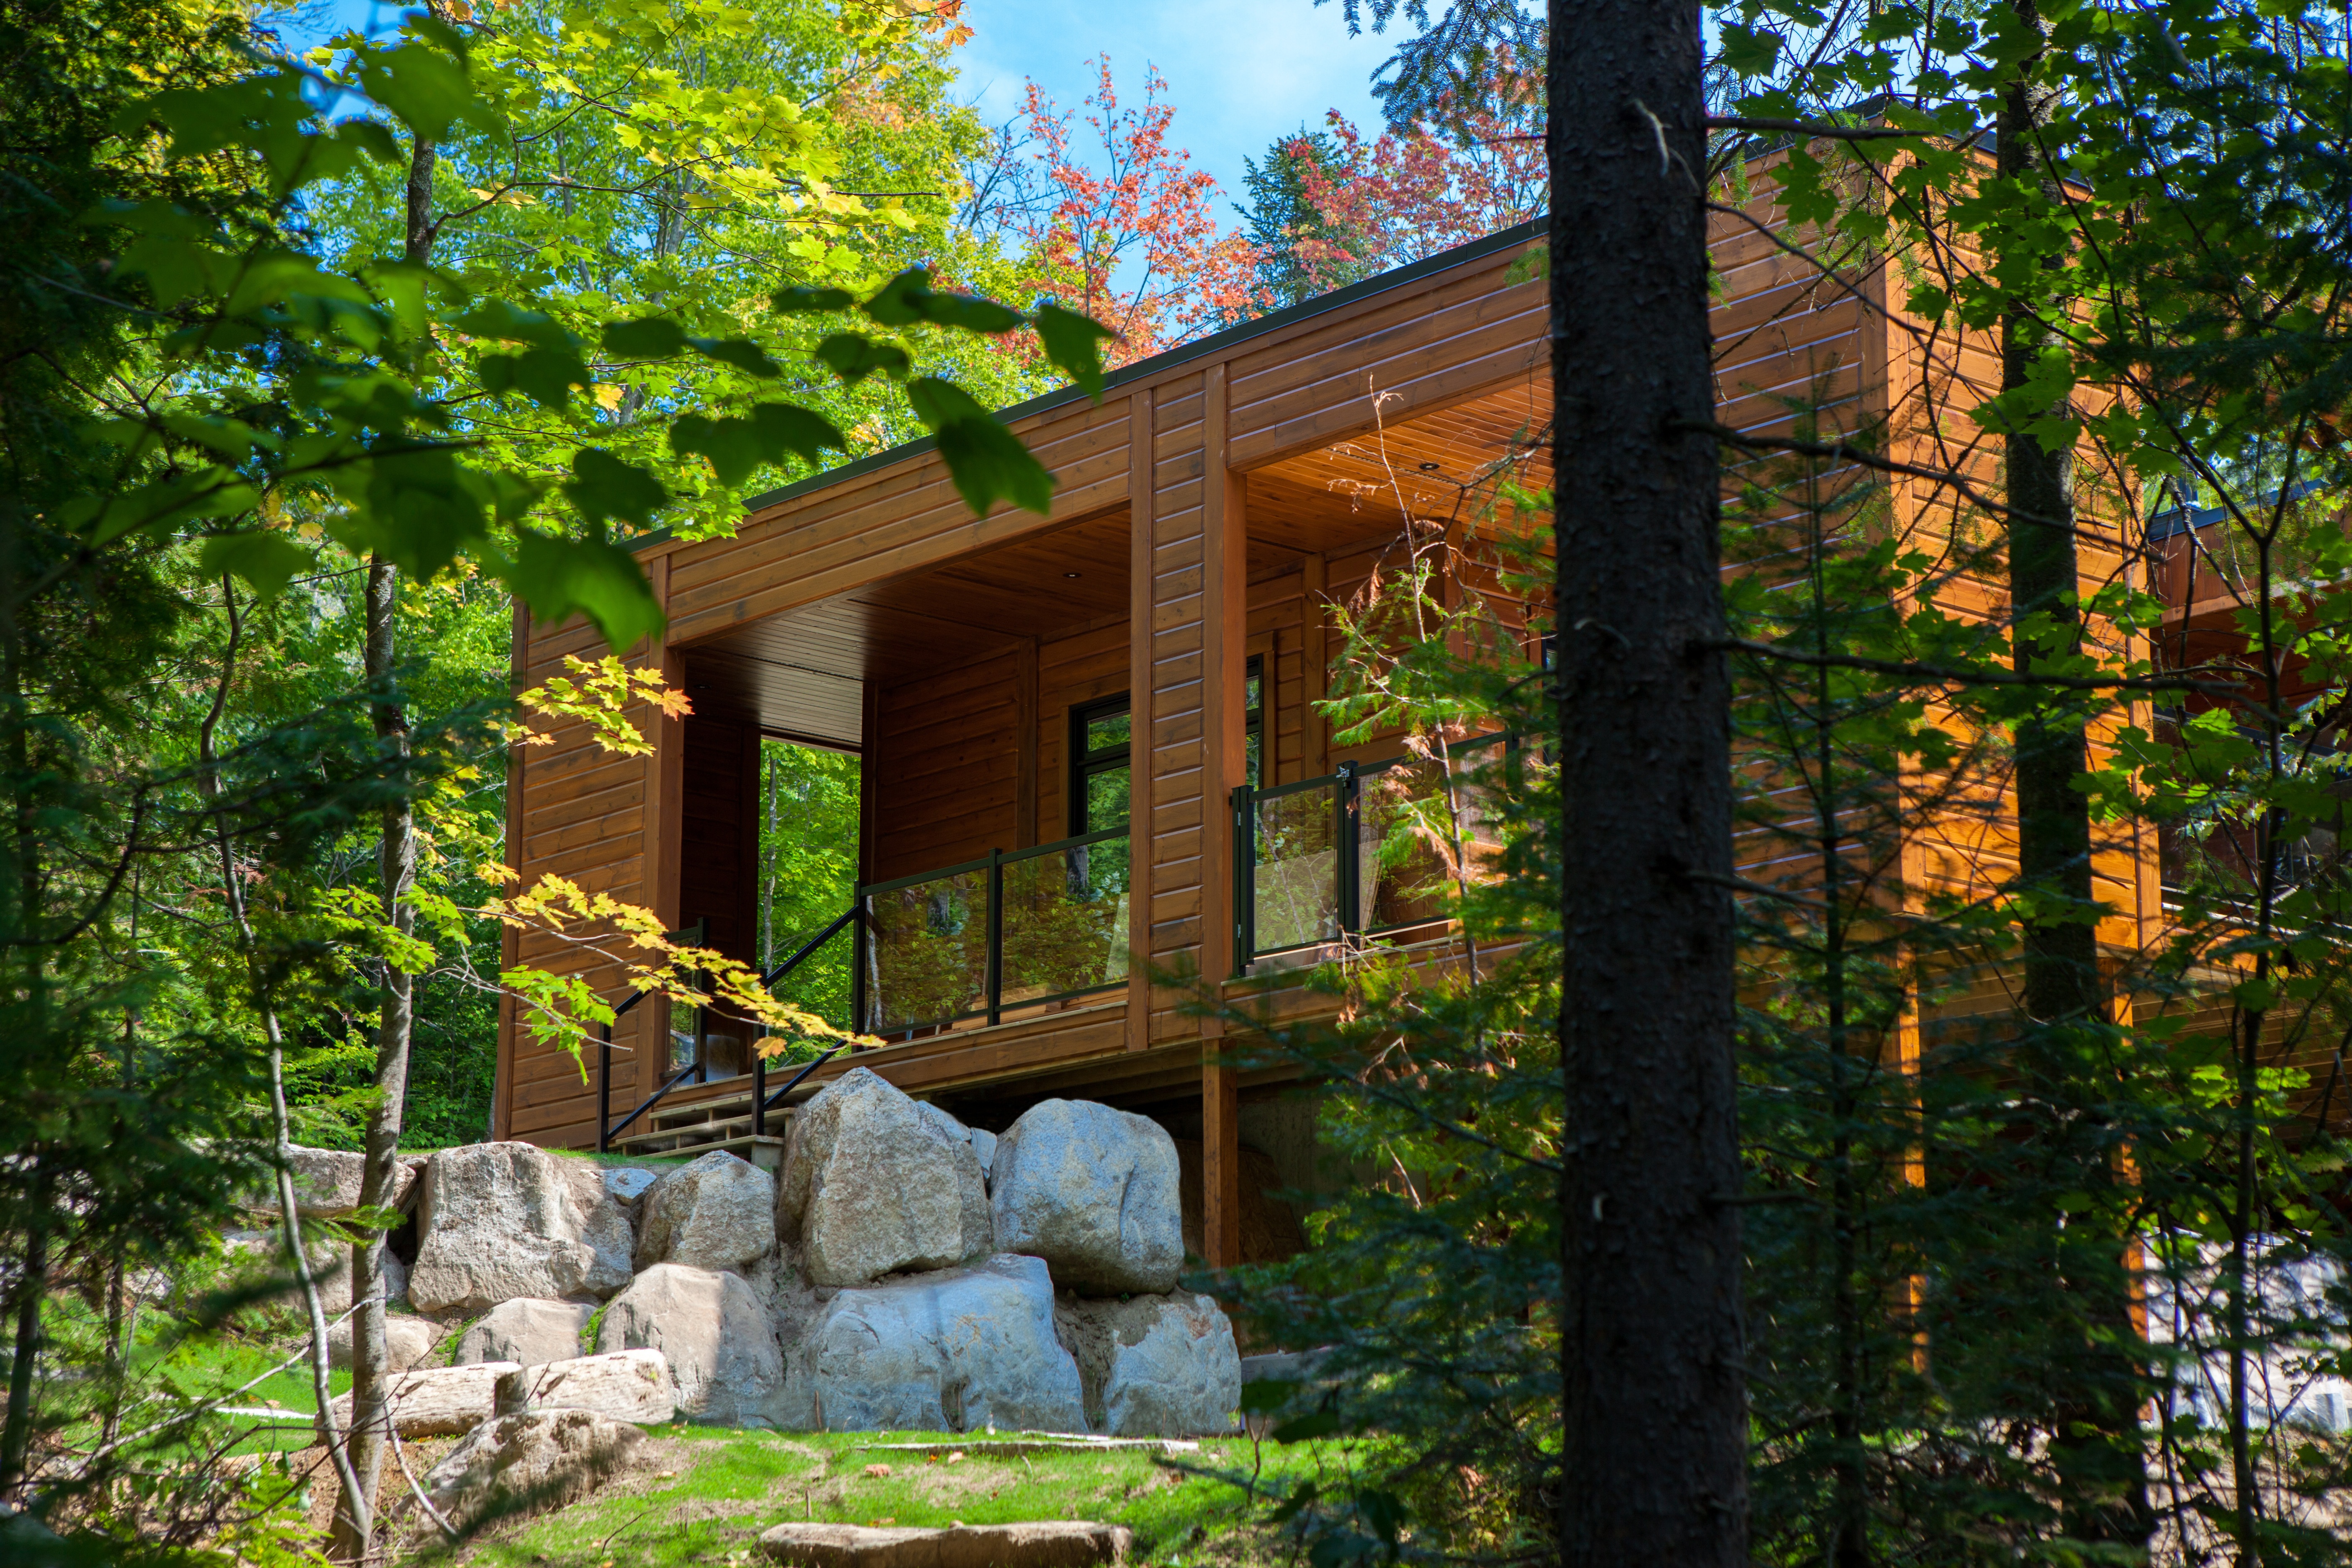 Timber Block Engineered Home - Build Green